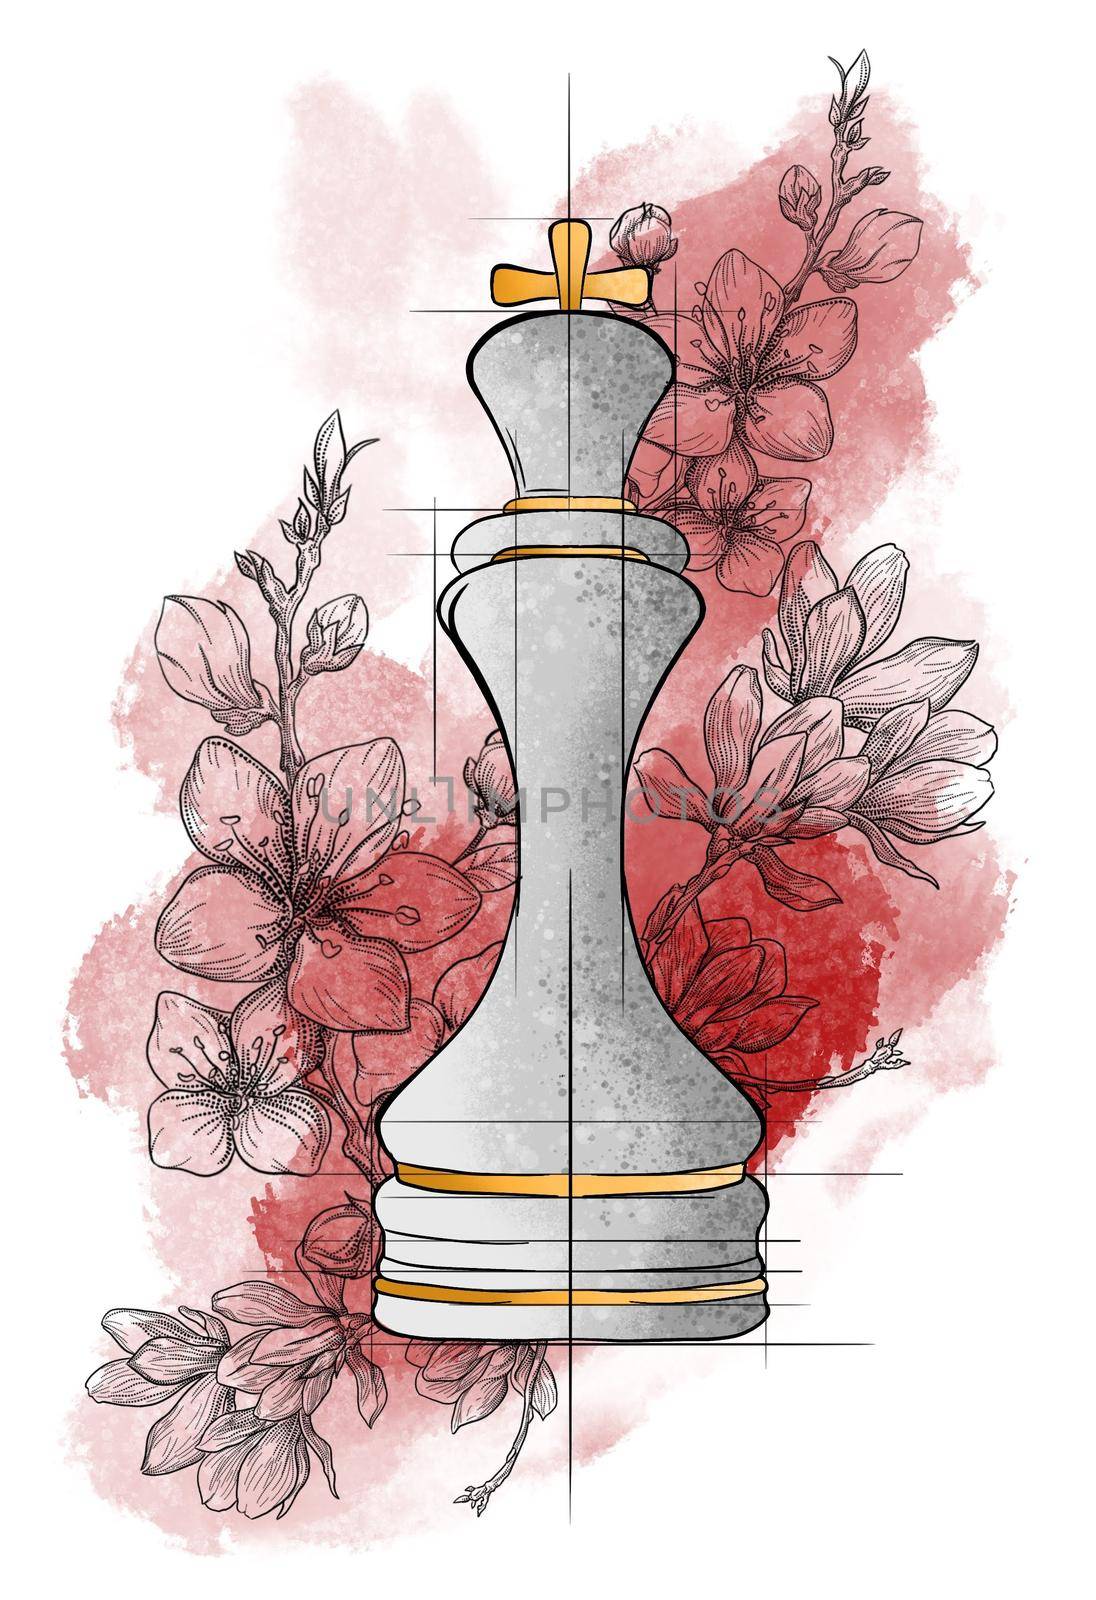 main chess piece white king in flowers by kr0k0